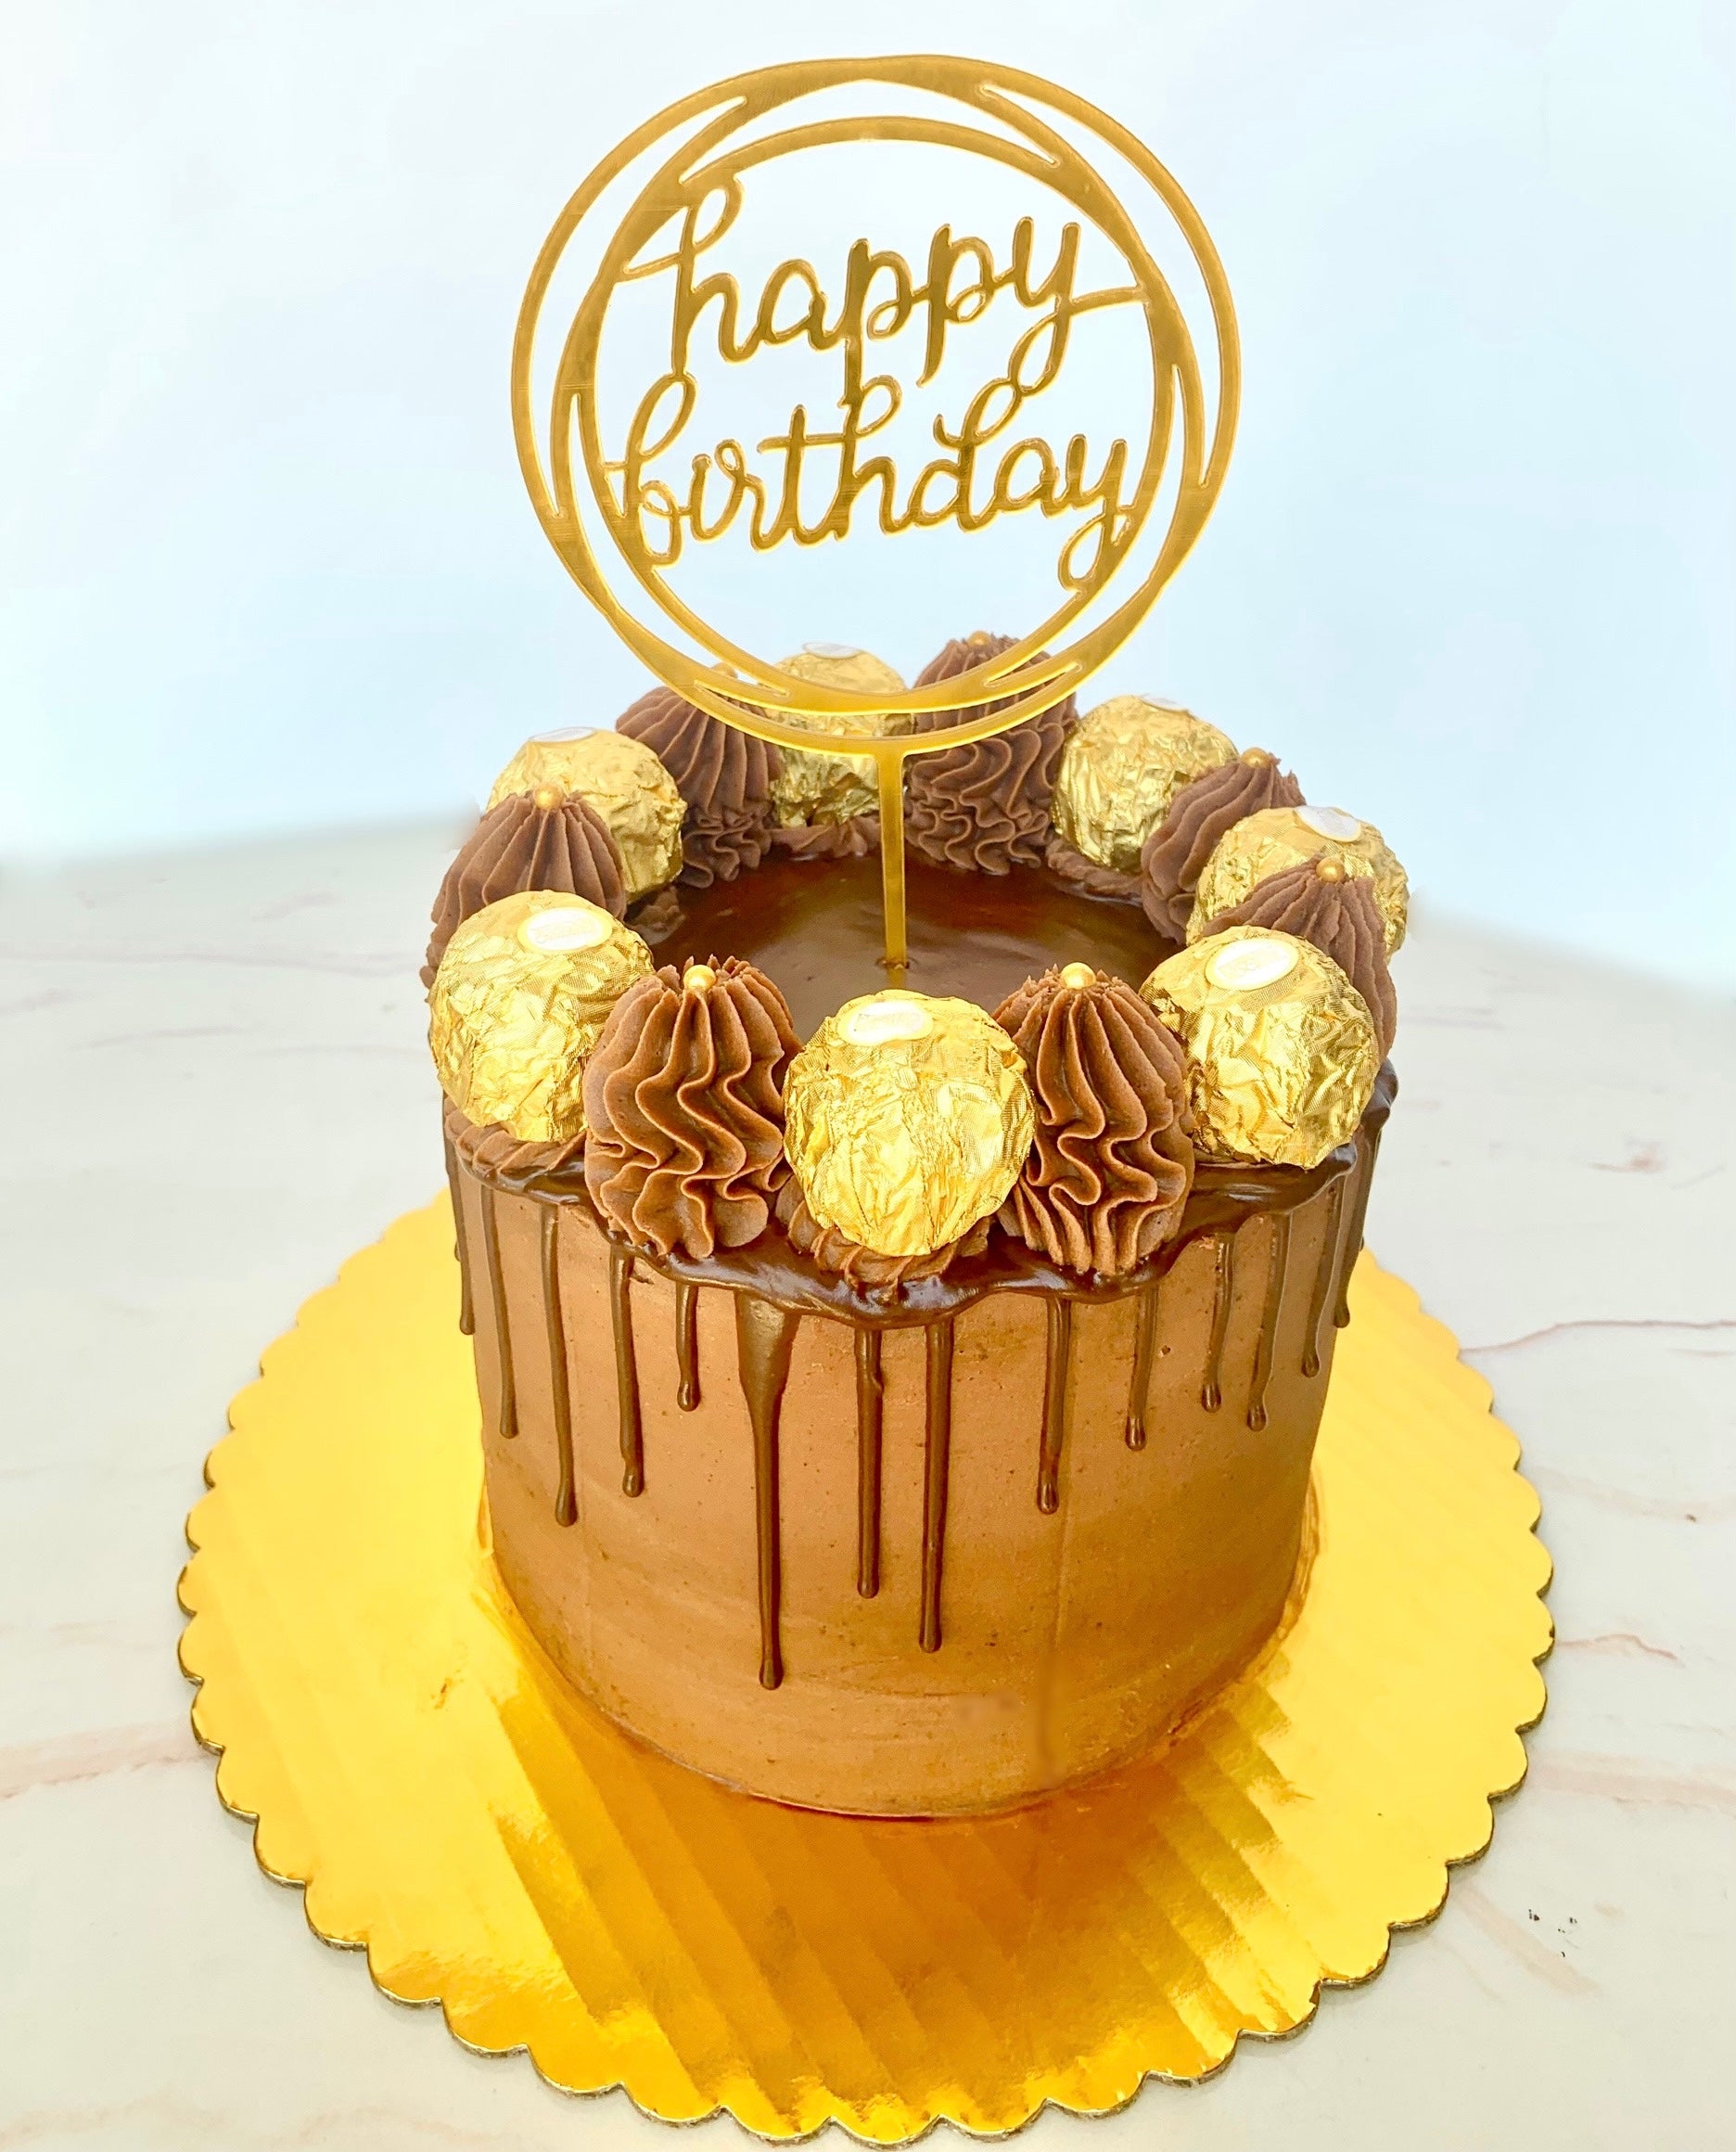 Send 3 Tier Premium Rocher & Almond Cake Online in India at Indiagift.in